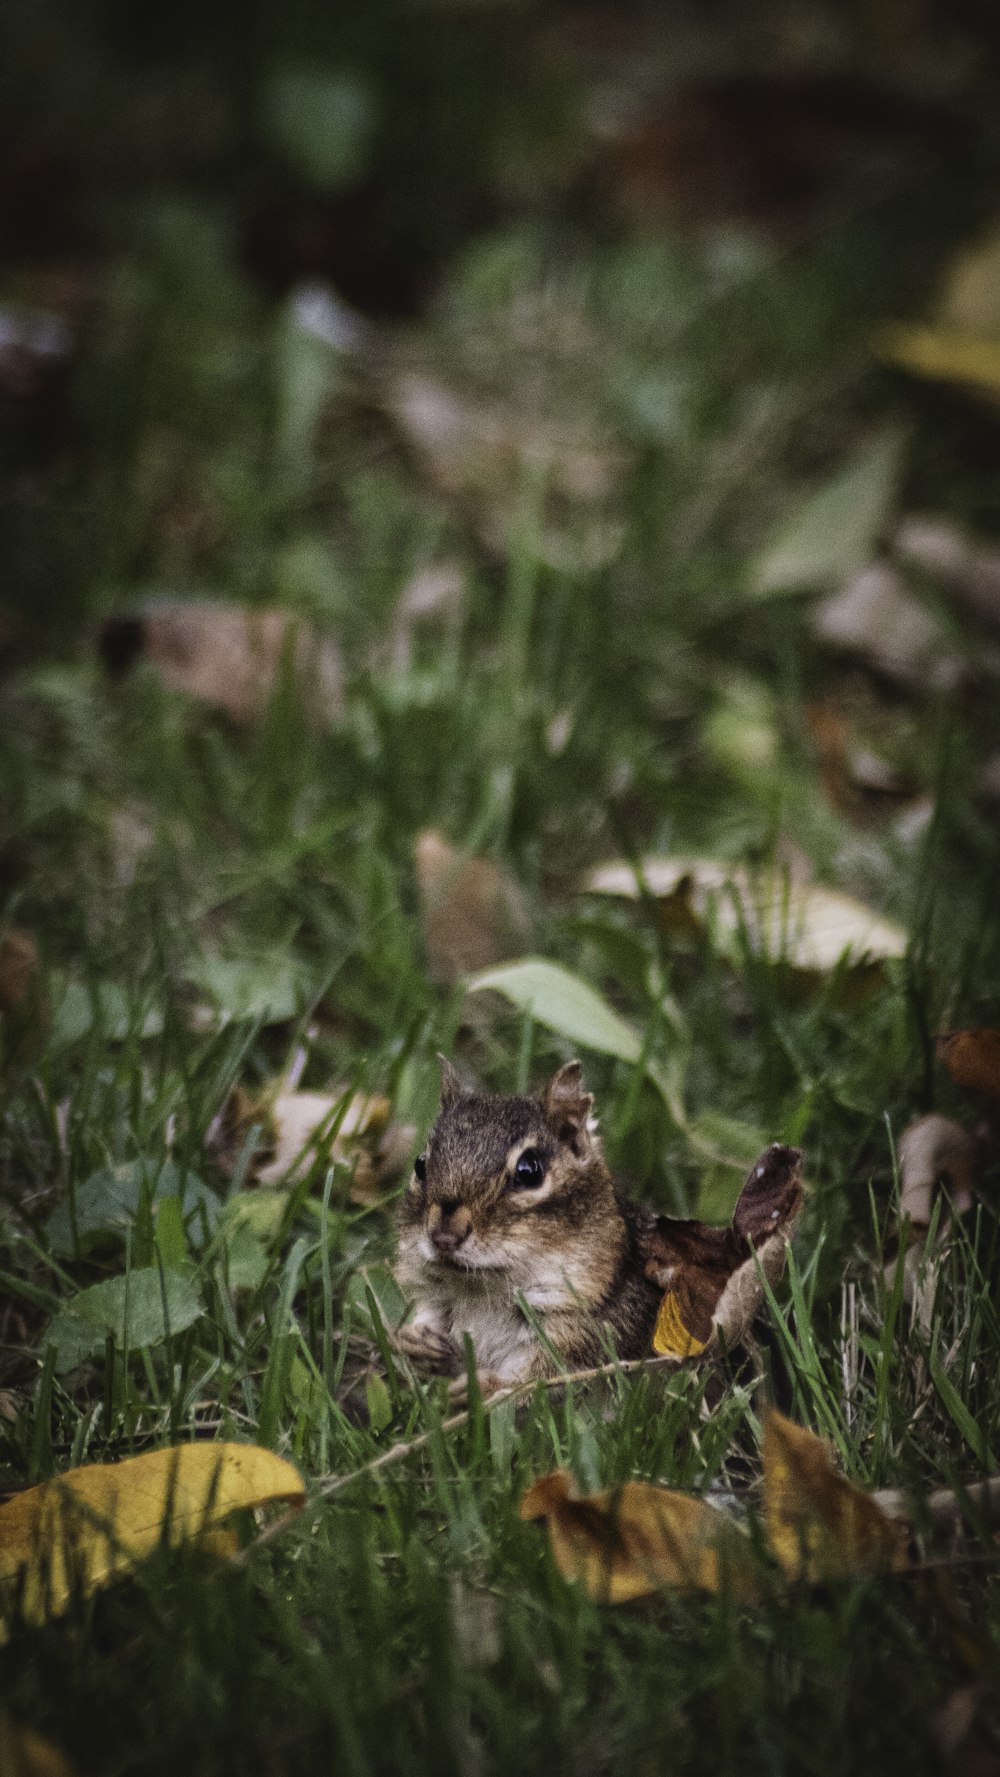 a small squirrel is sitting in the grass